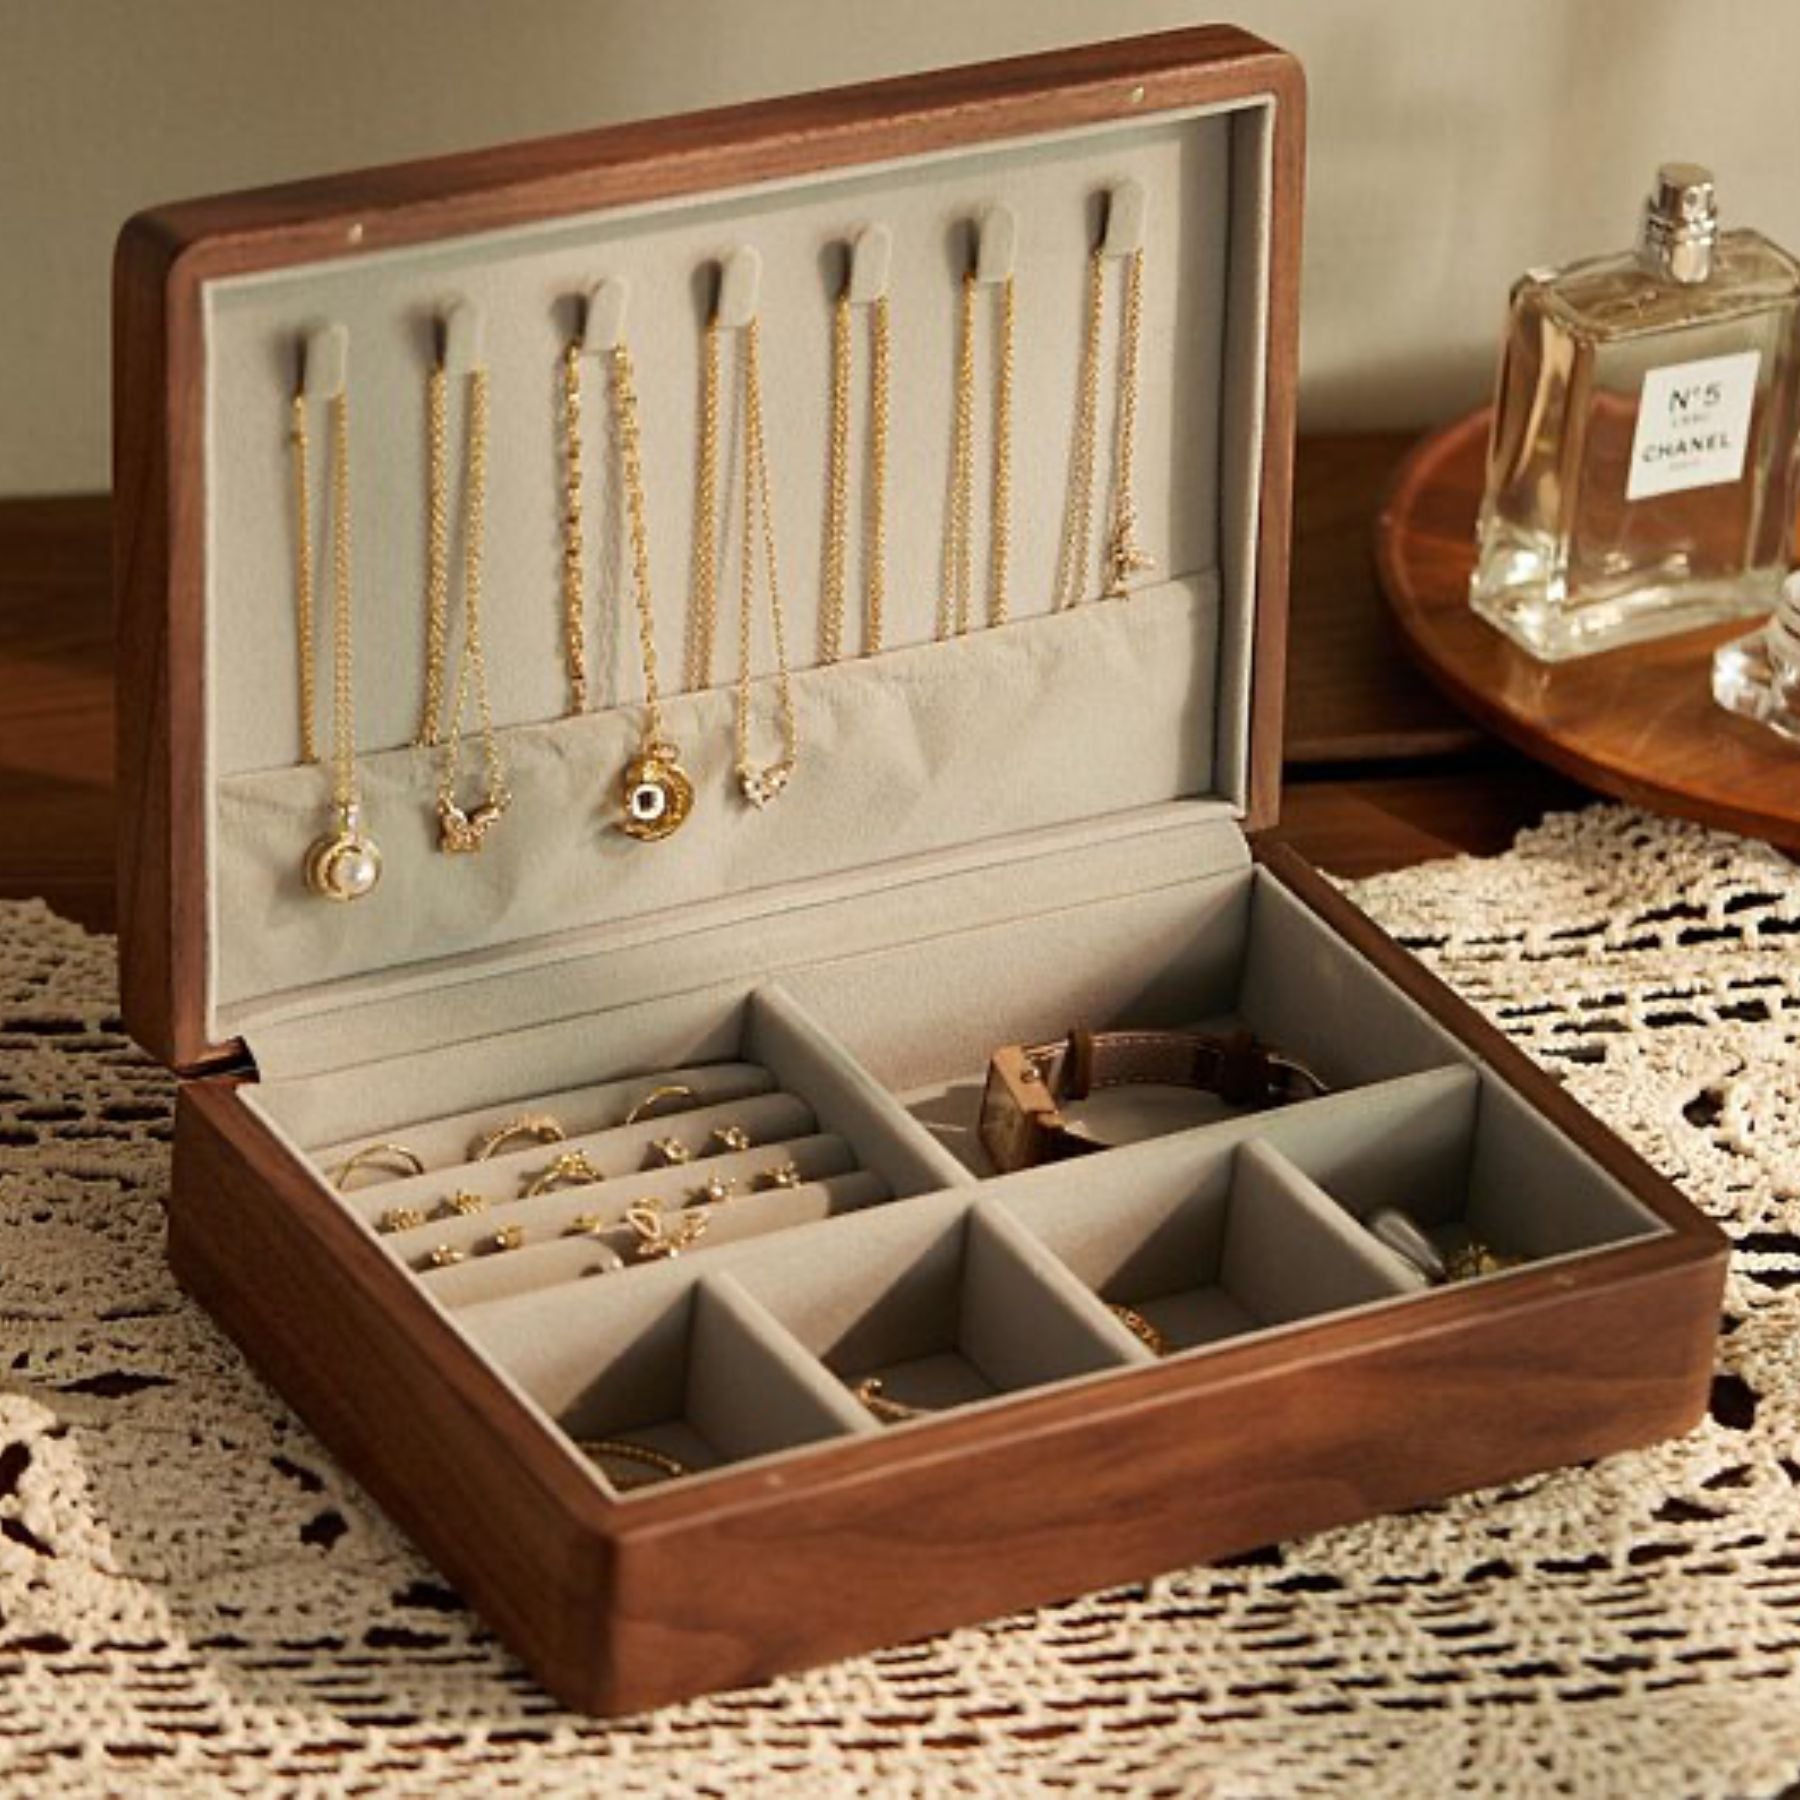 gift your loved one the joy of a well organized jewelry collection